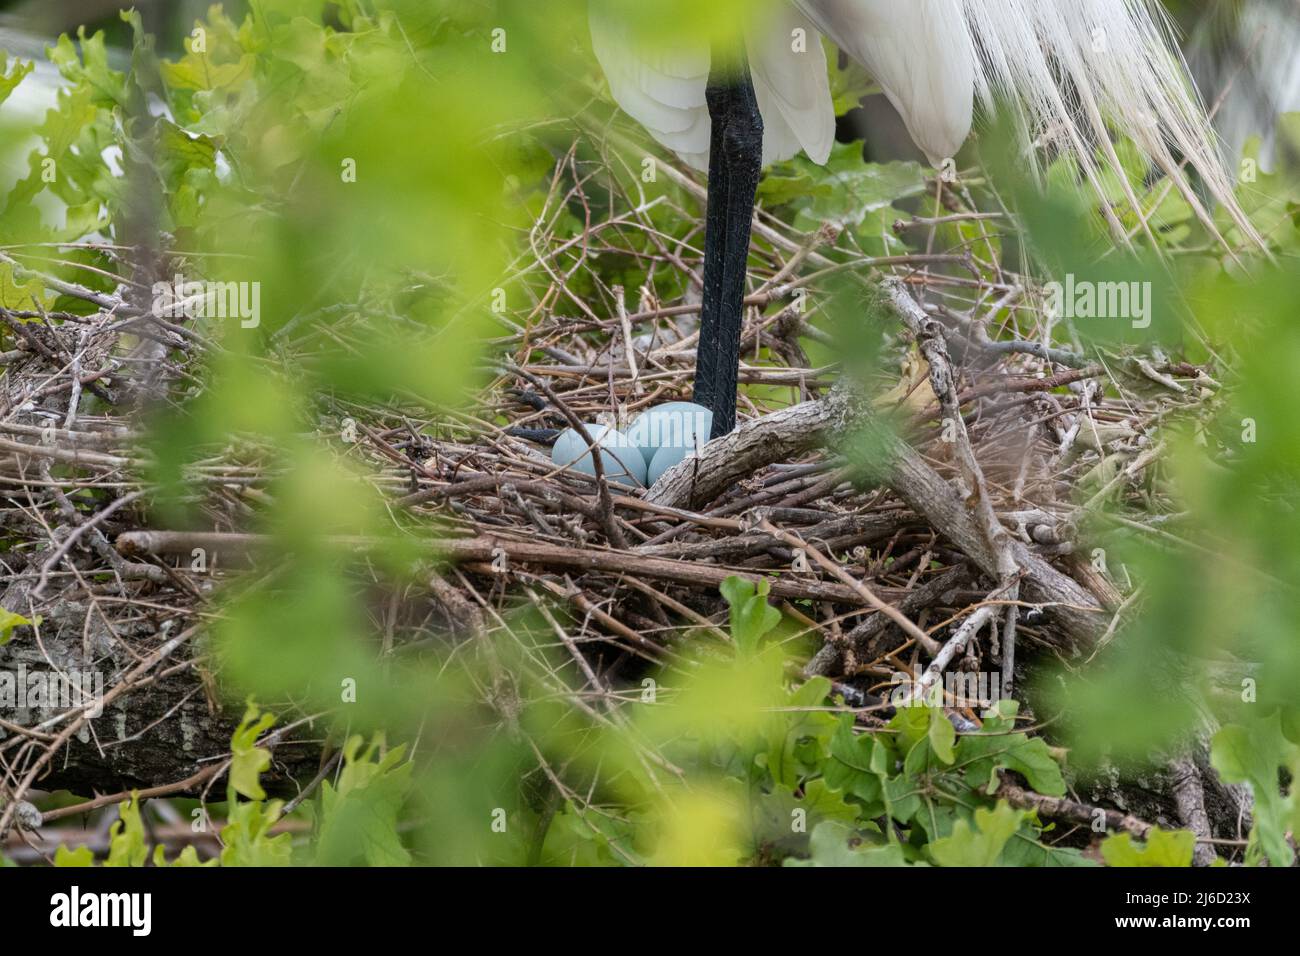 The long, black legs of a Great White Egret standing over a clutch of blue eggs in its nest at the UTSWMC Rookery in Dallas, Texas on a spring morning Stock Photo